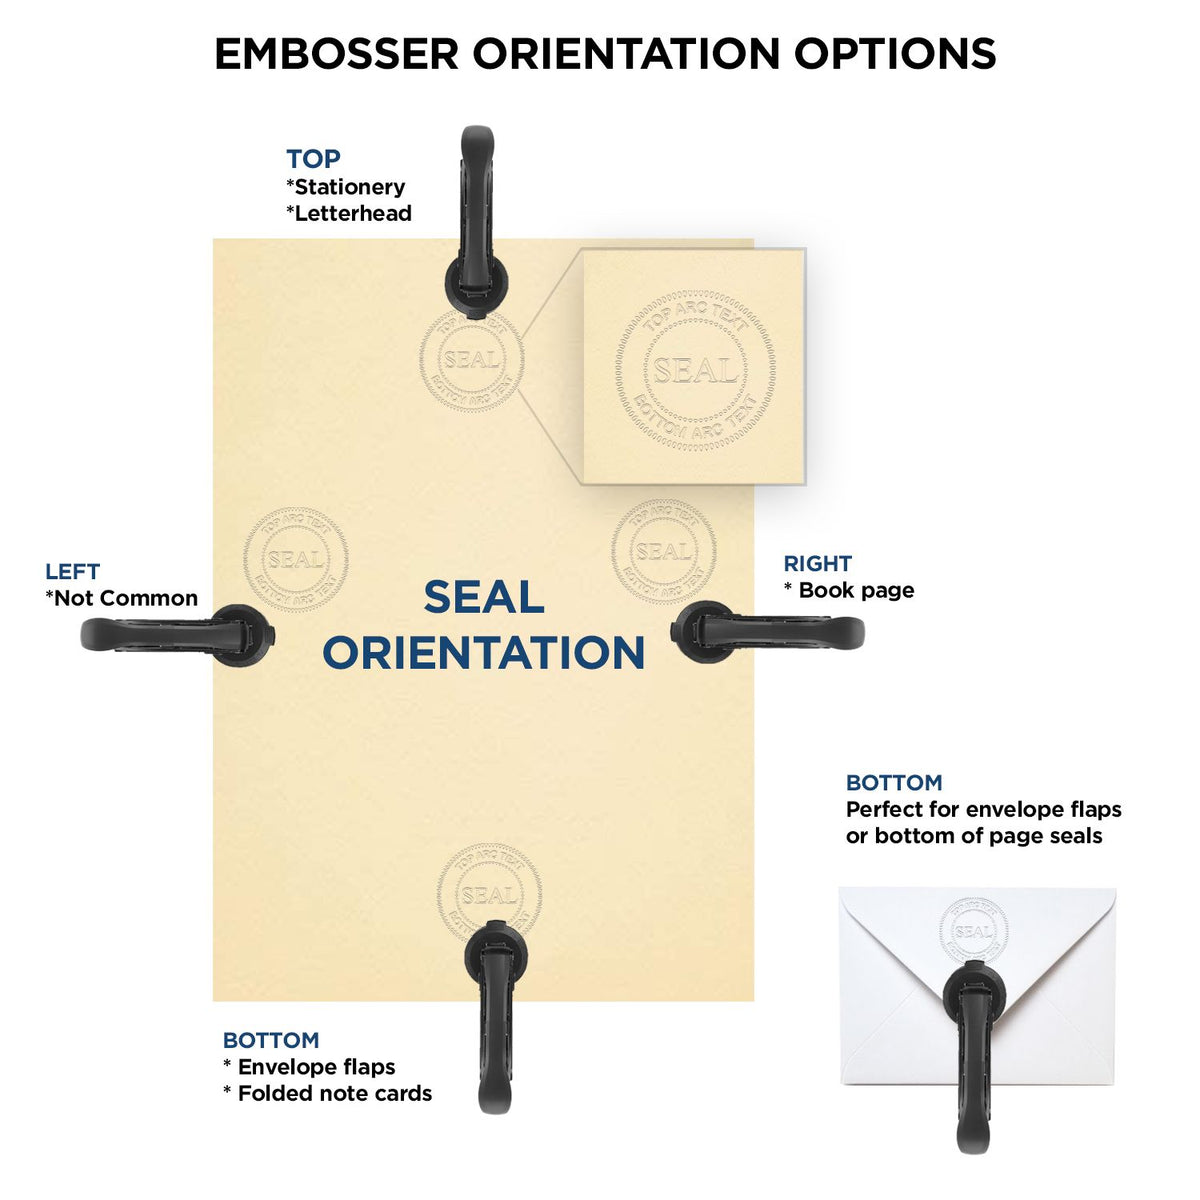 An infographic for the Long Reach Connecticut Land Surveyor Seal showing embosser orientation, this is showing examples of a top, bottom, right and left insert.